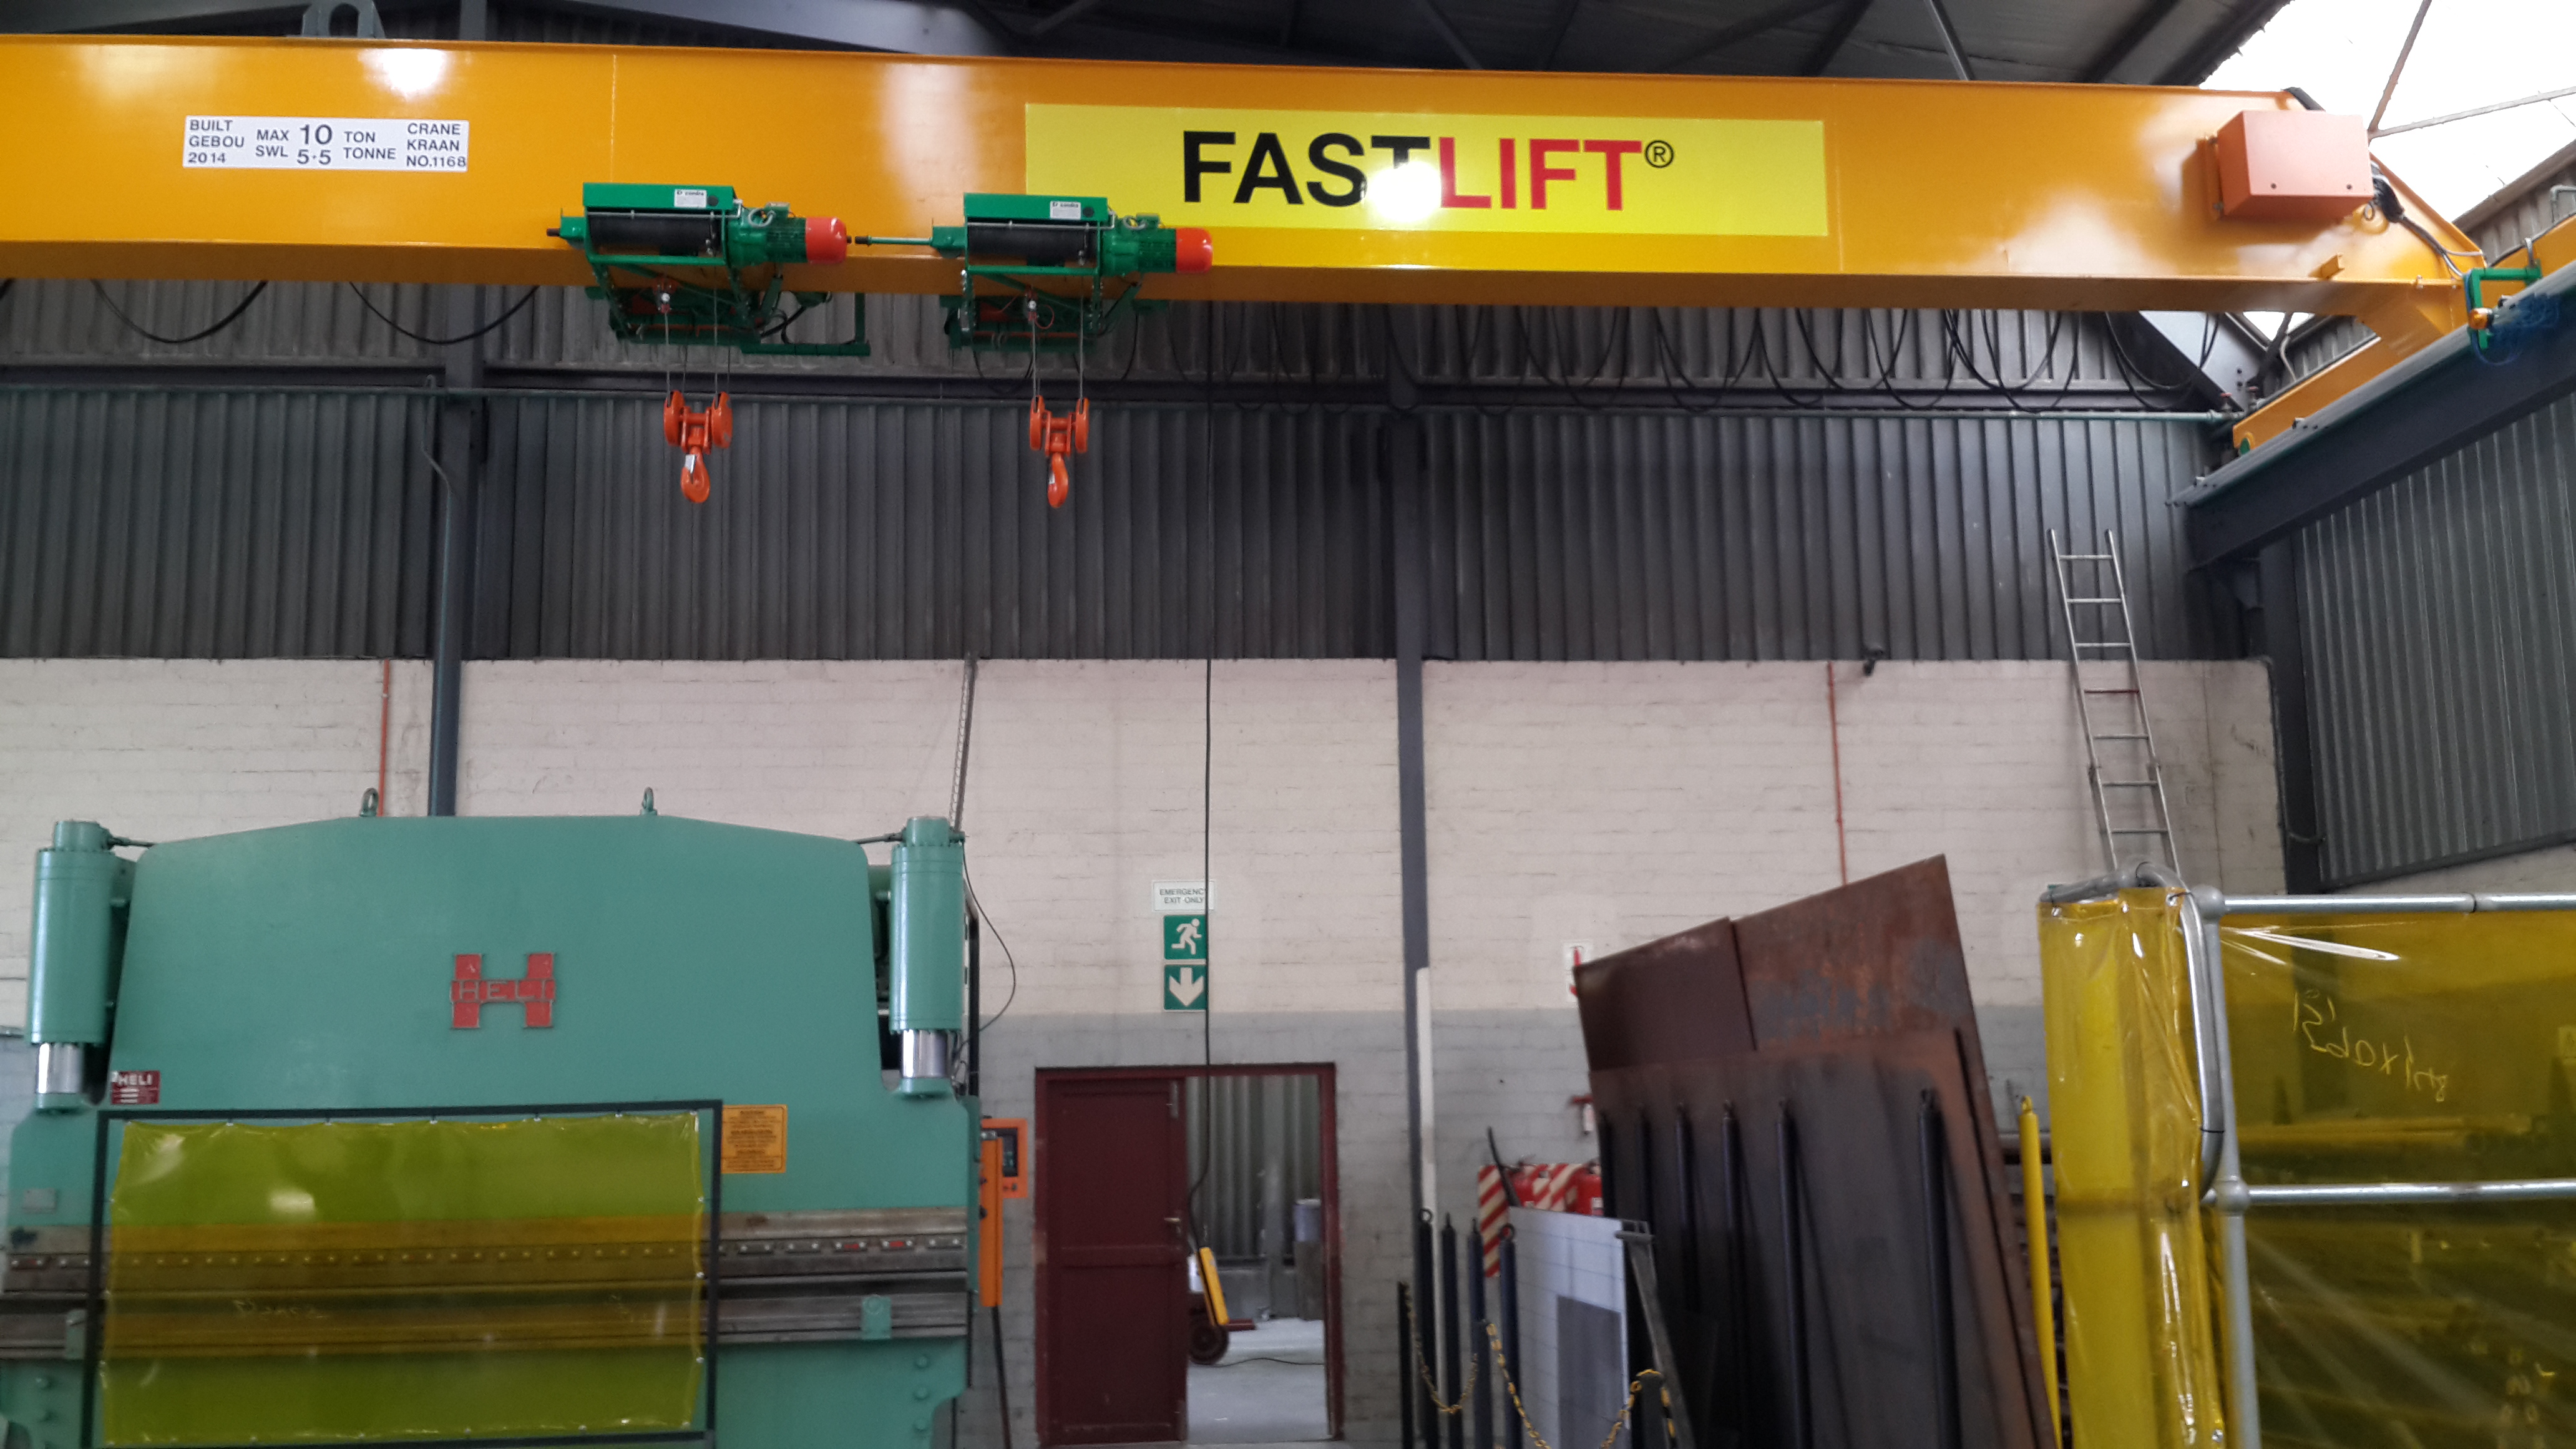 Fastlift Cranes & Services (Pty Ltd is a diversified company specialising in Mobile & Tower Cranes, ...